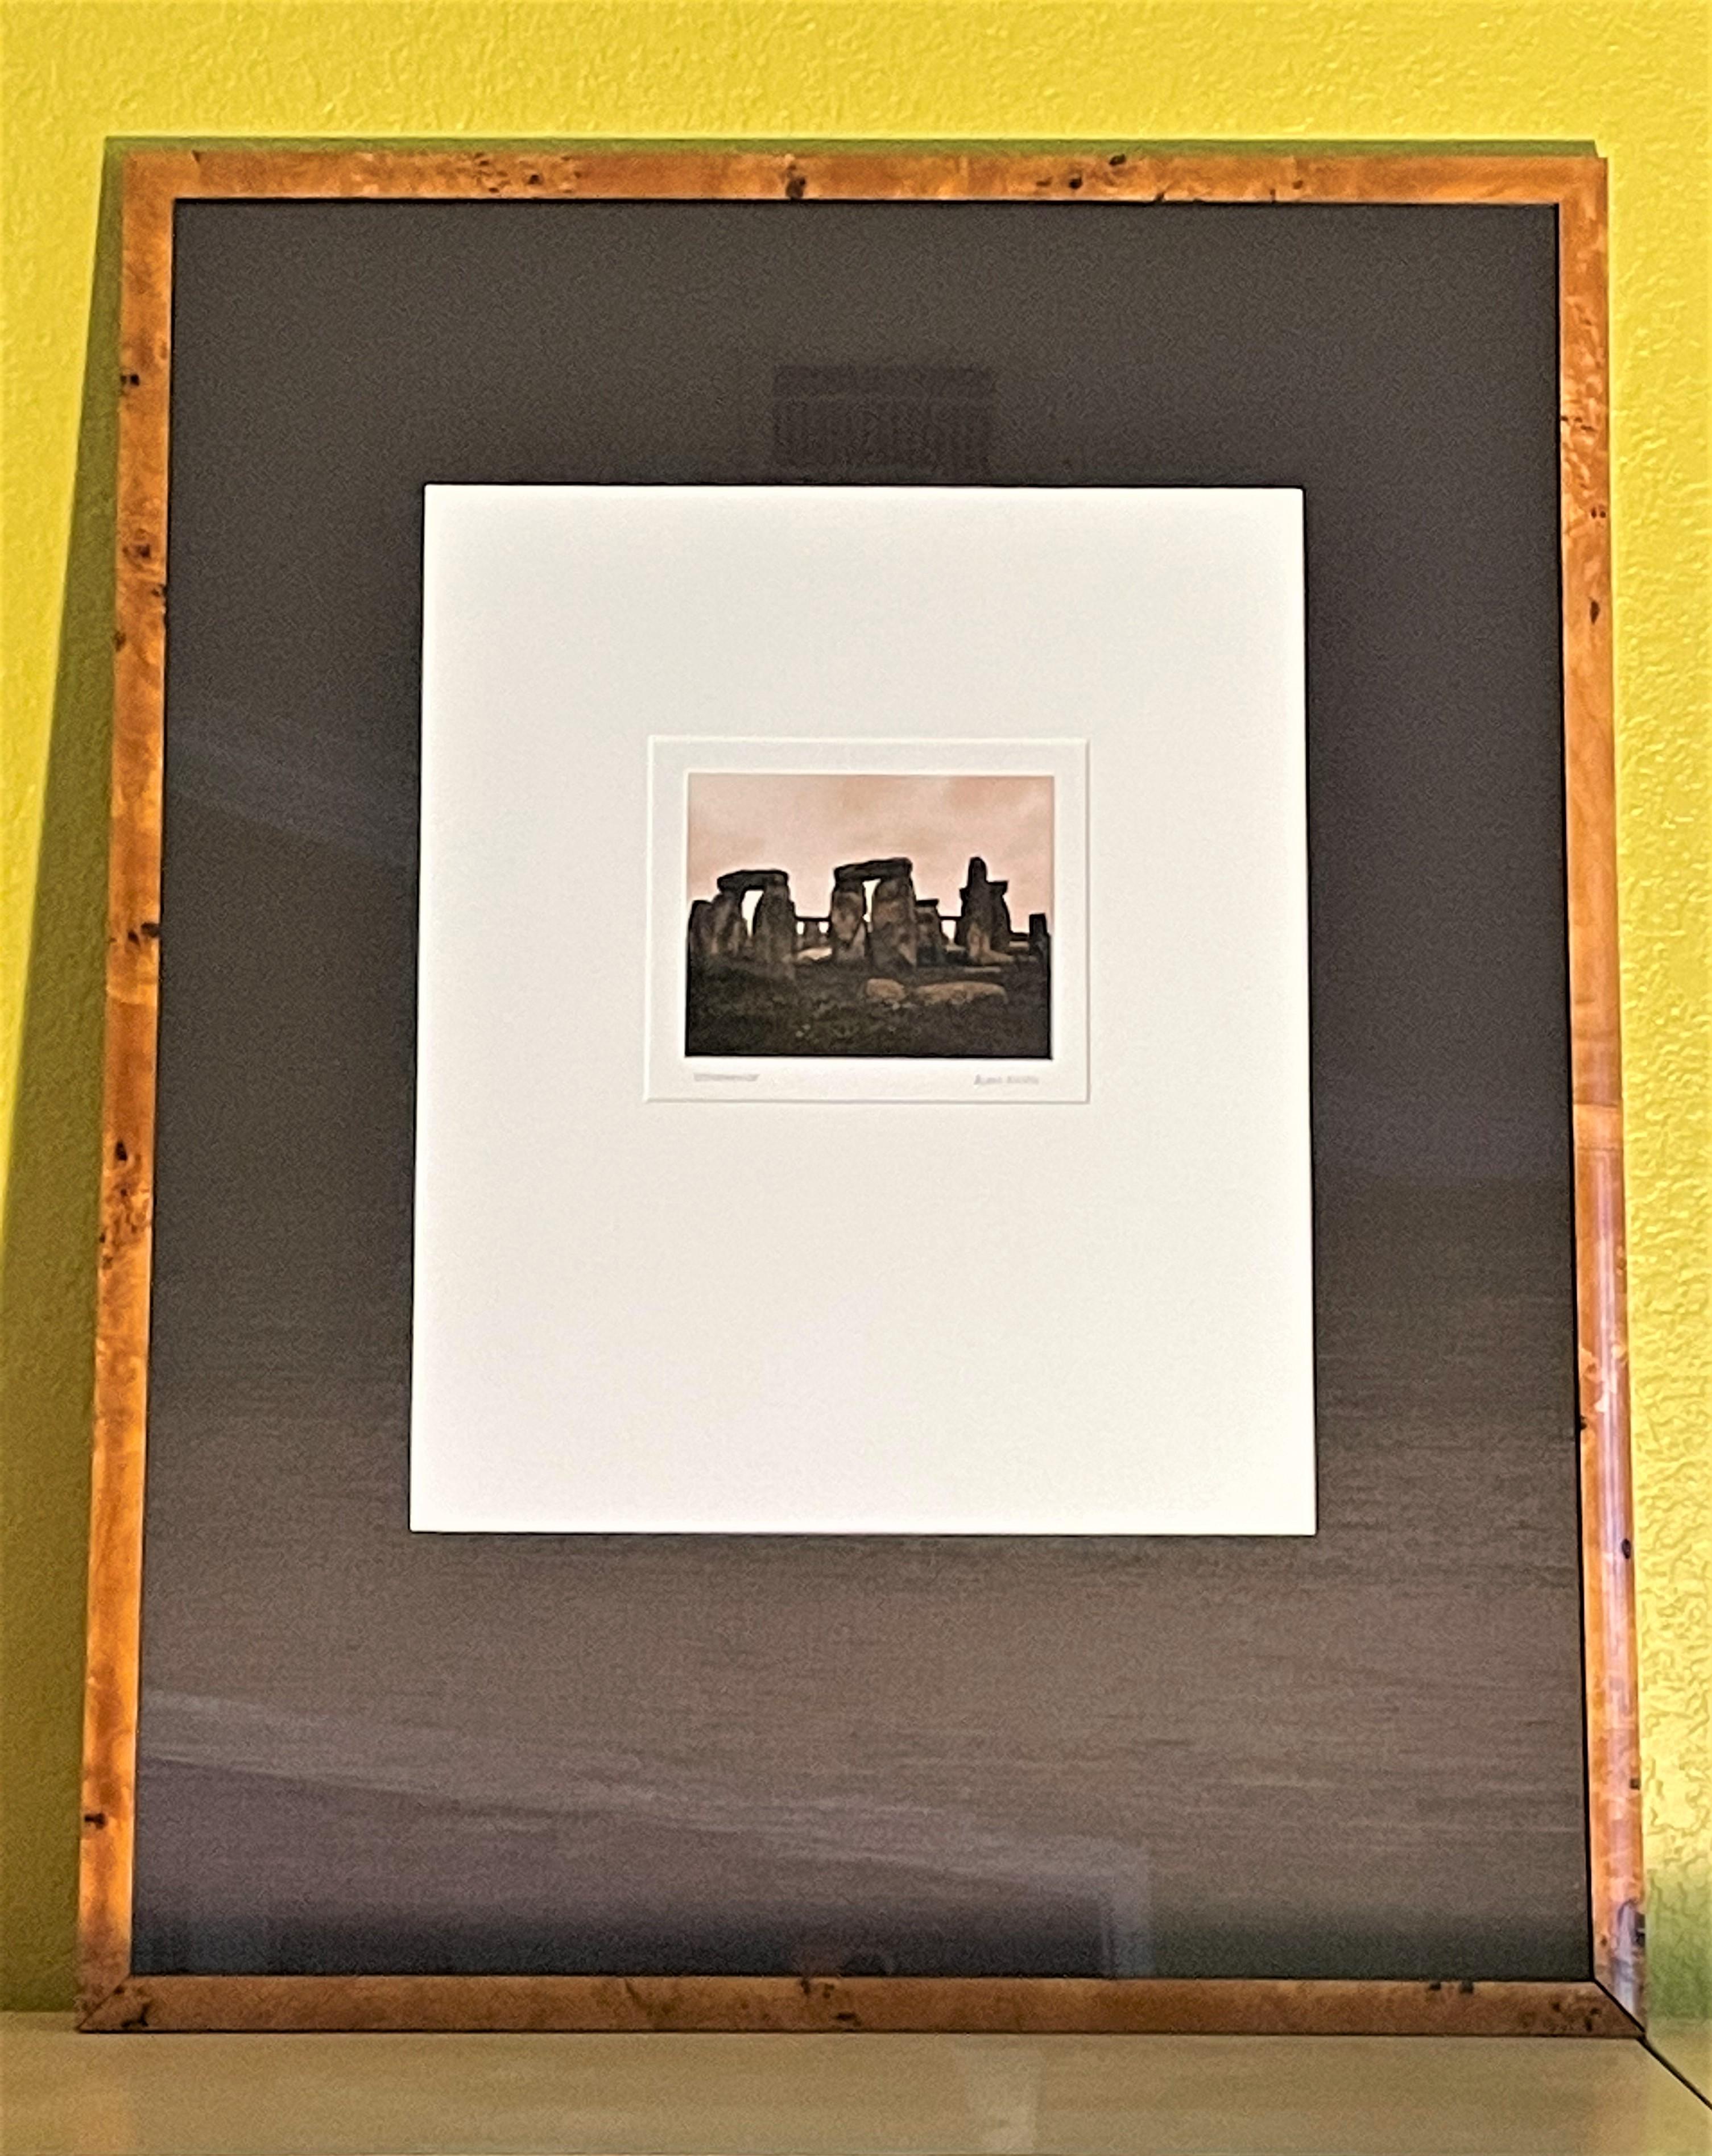 This image of Stonehenge by internationally acclaimed photographer, Alan Klug, represents his work before he transitioned to archival pigment ink printing, from true darkroom photography. This particular sepia image of Stonehenge is no longer